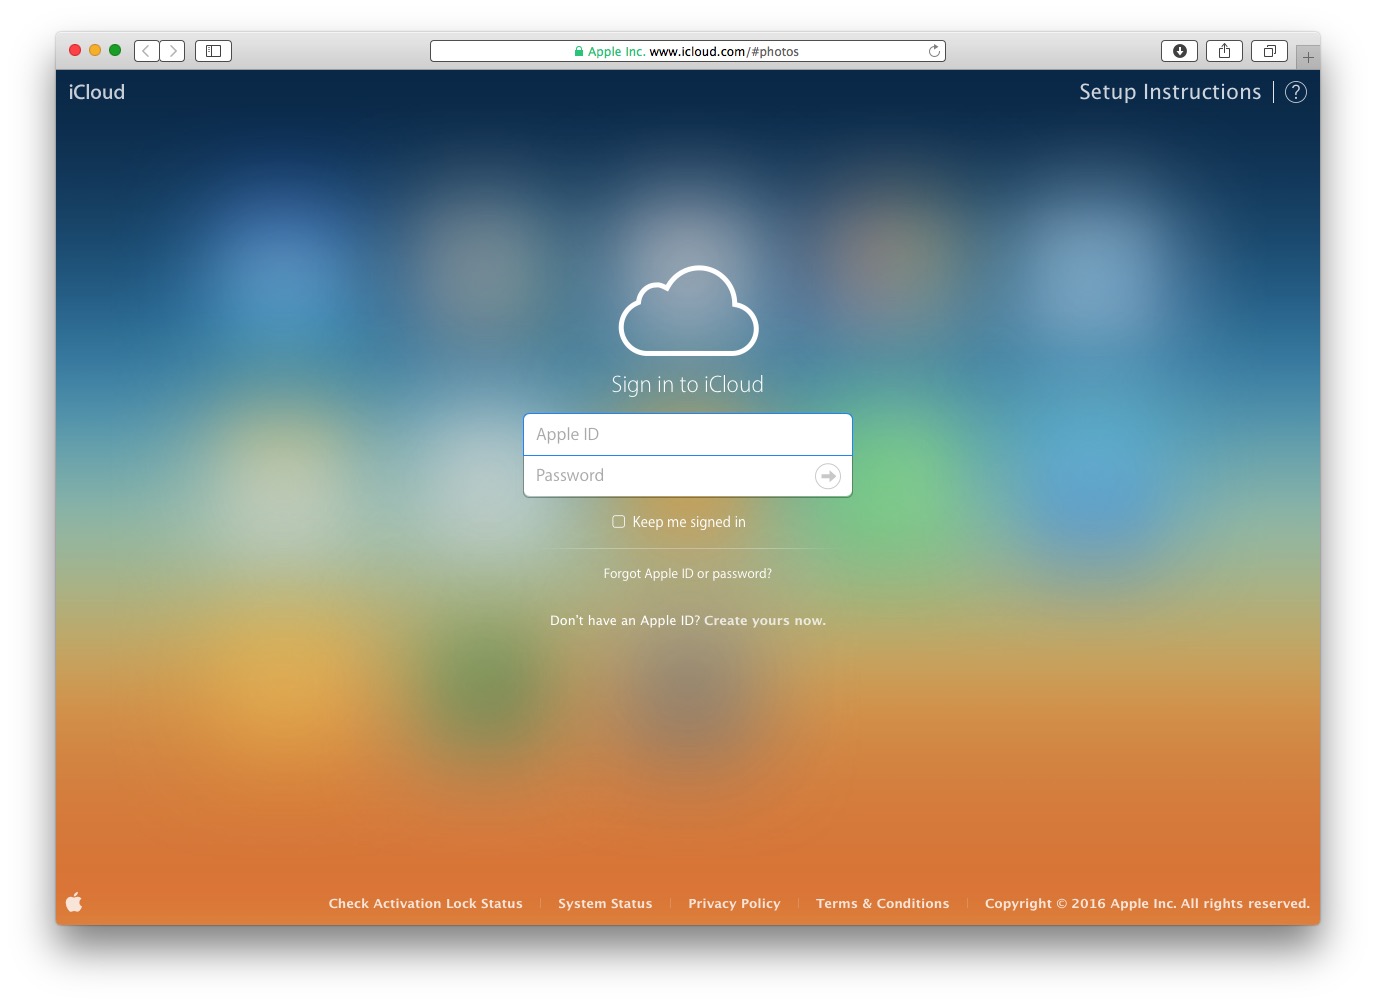 Download full resolution photos from icloud to mac